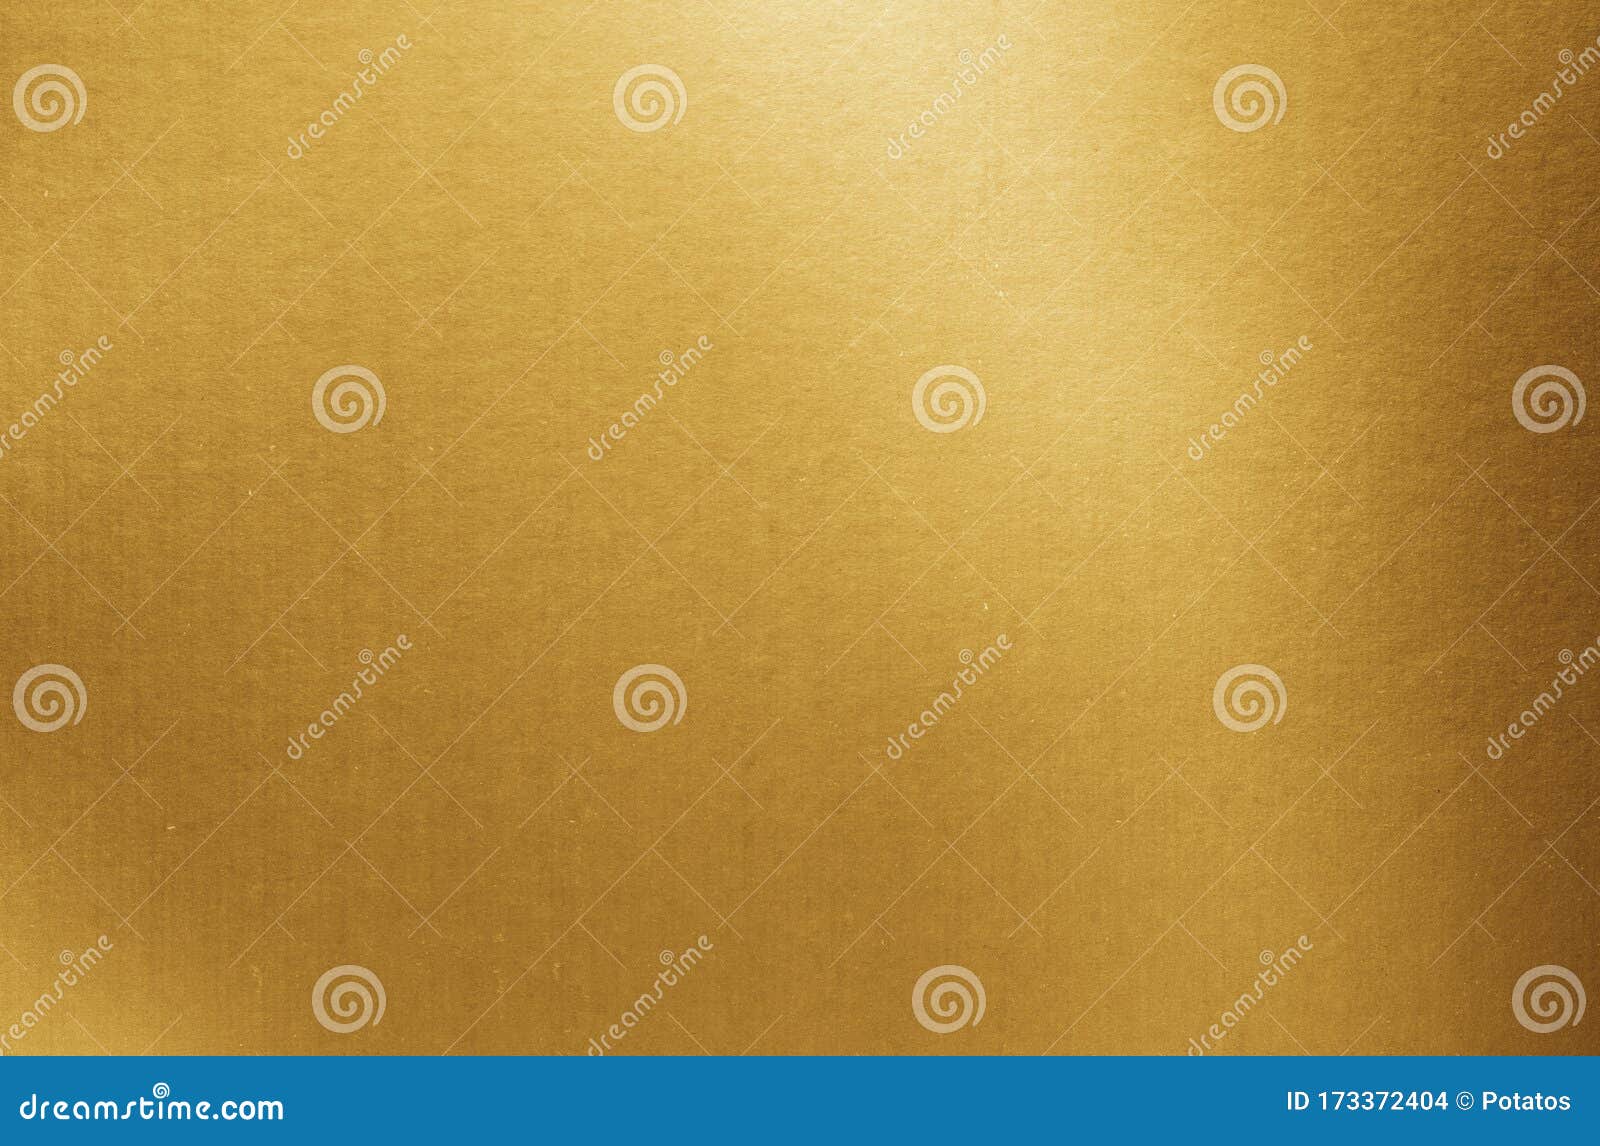 gold paper texture background. golden metallic blank paper sheet surface with light reflection